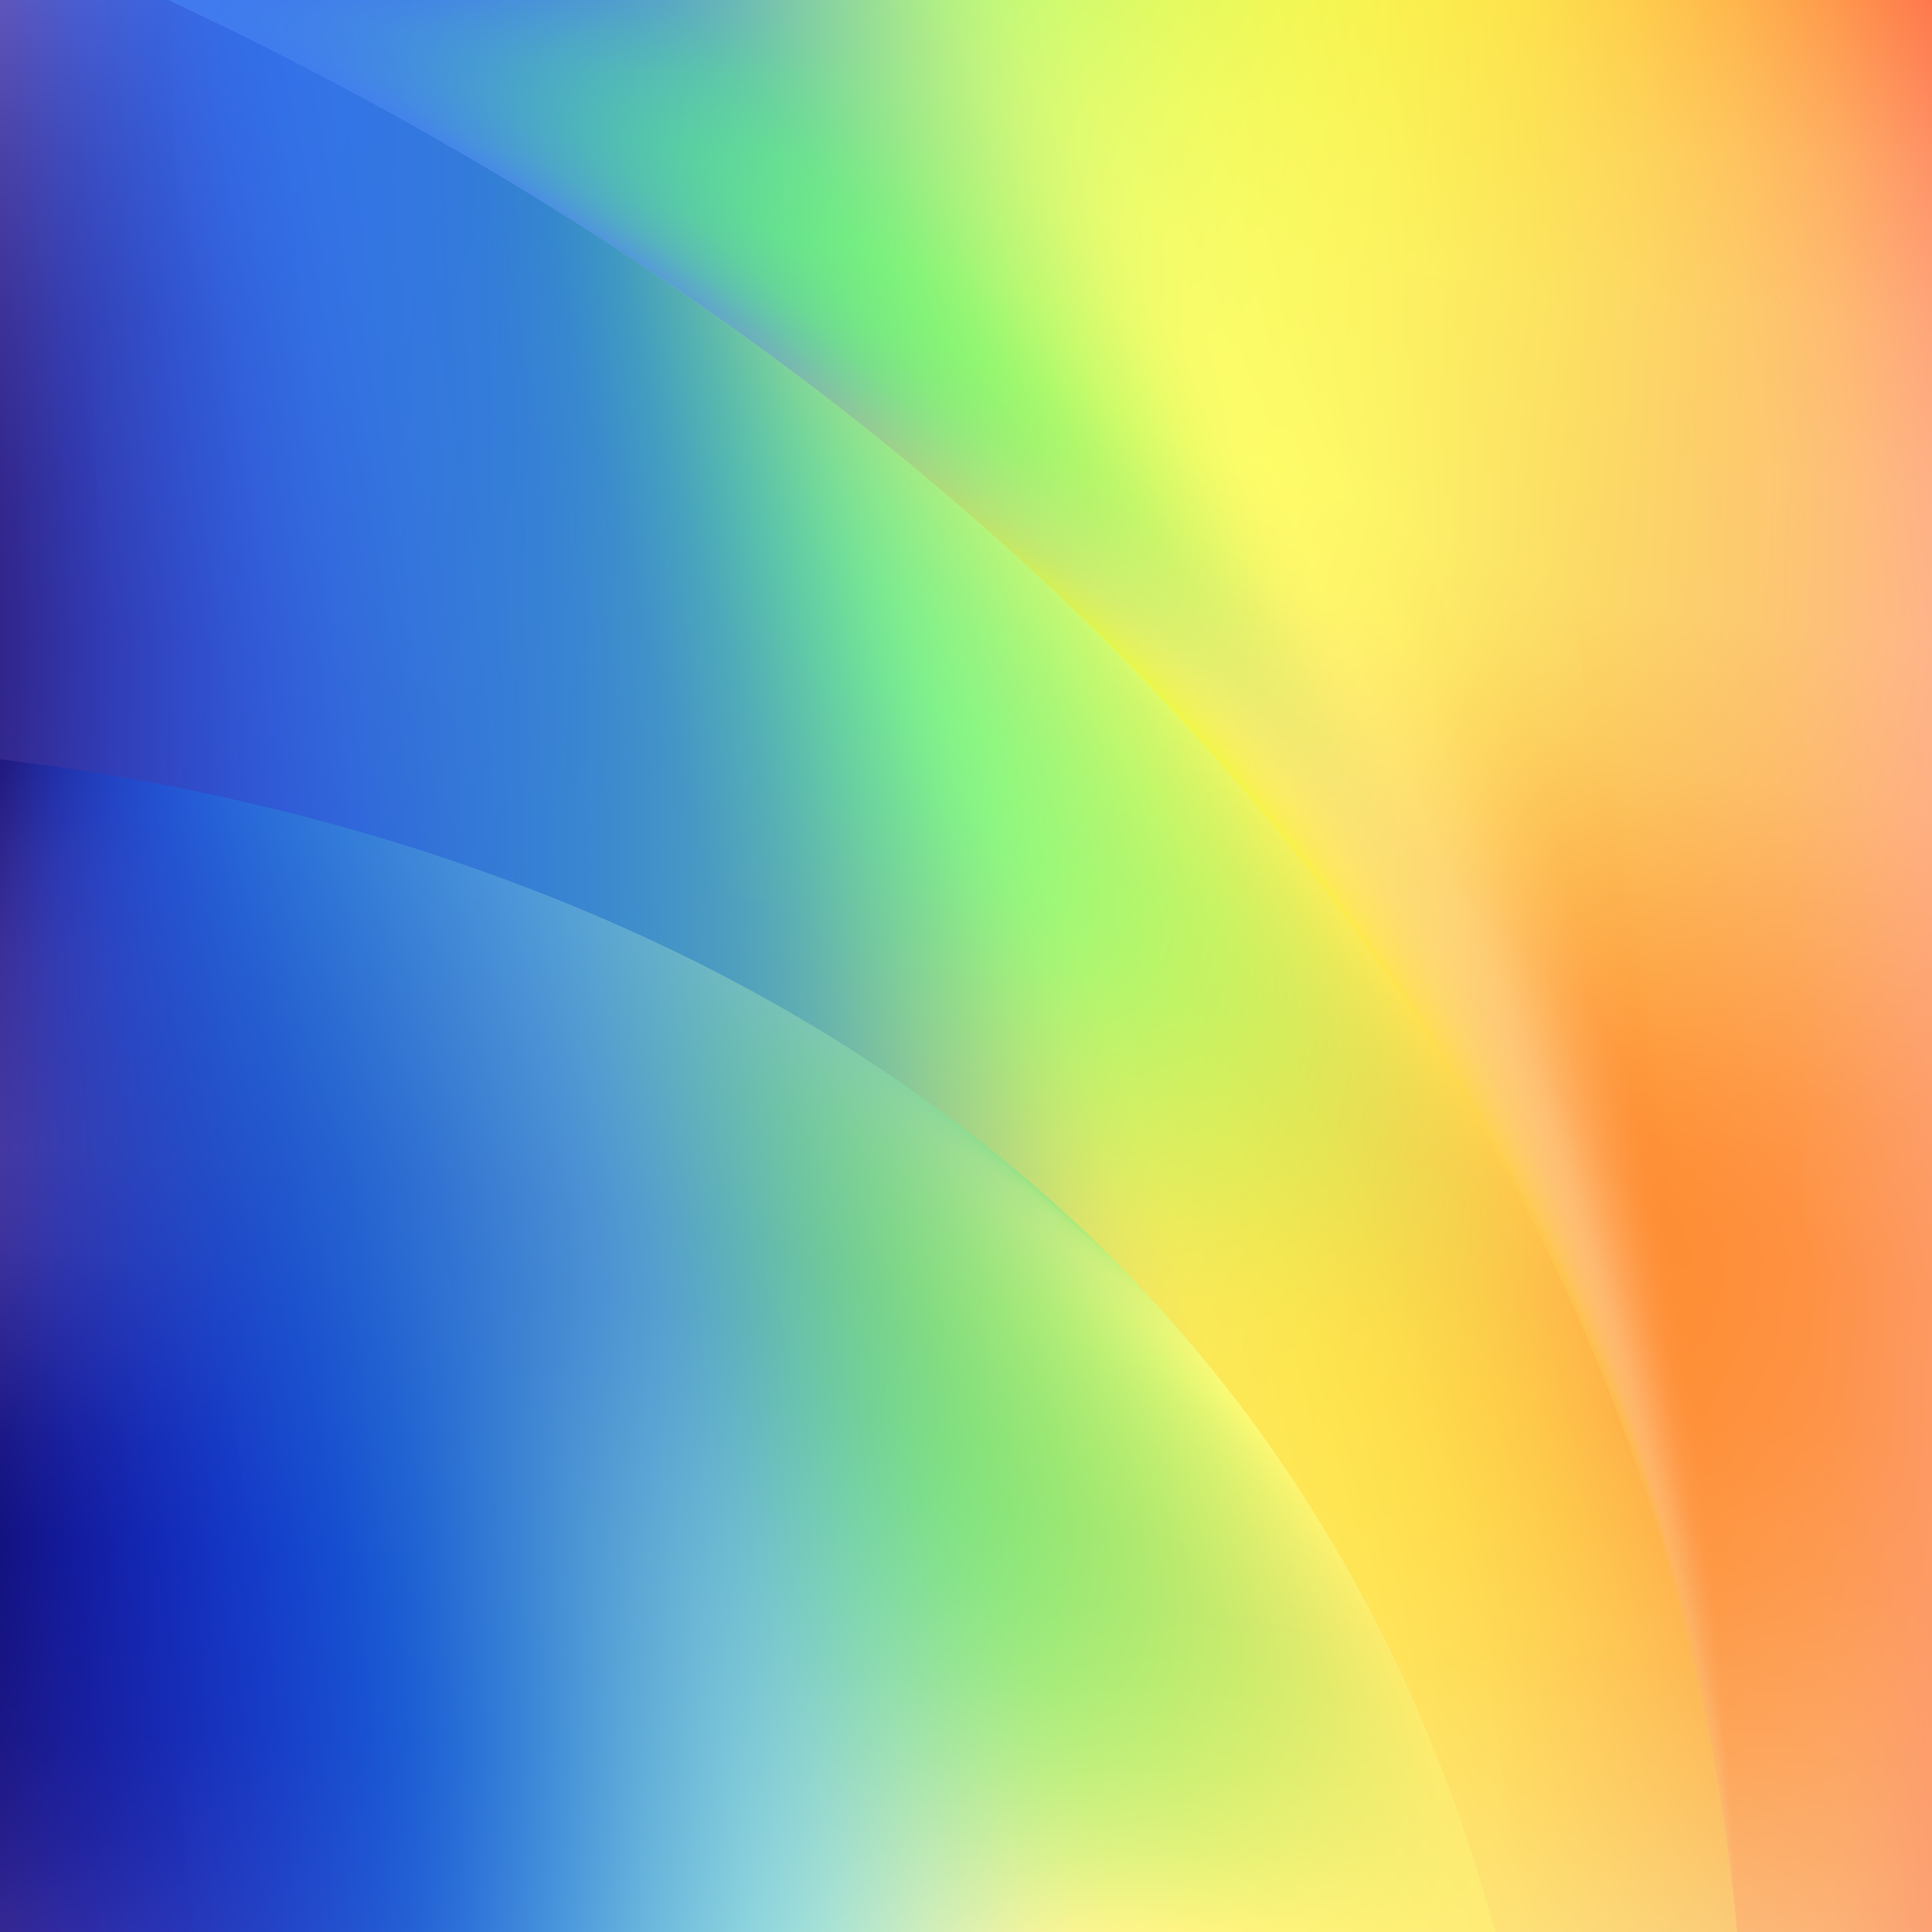 Abstract Pastel Rainbow Graphic Background - Circle - HD Wallpaper 